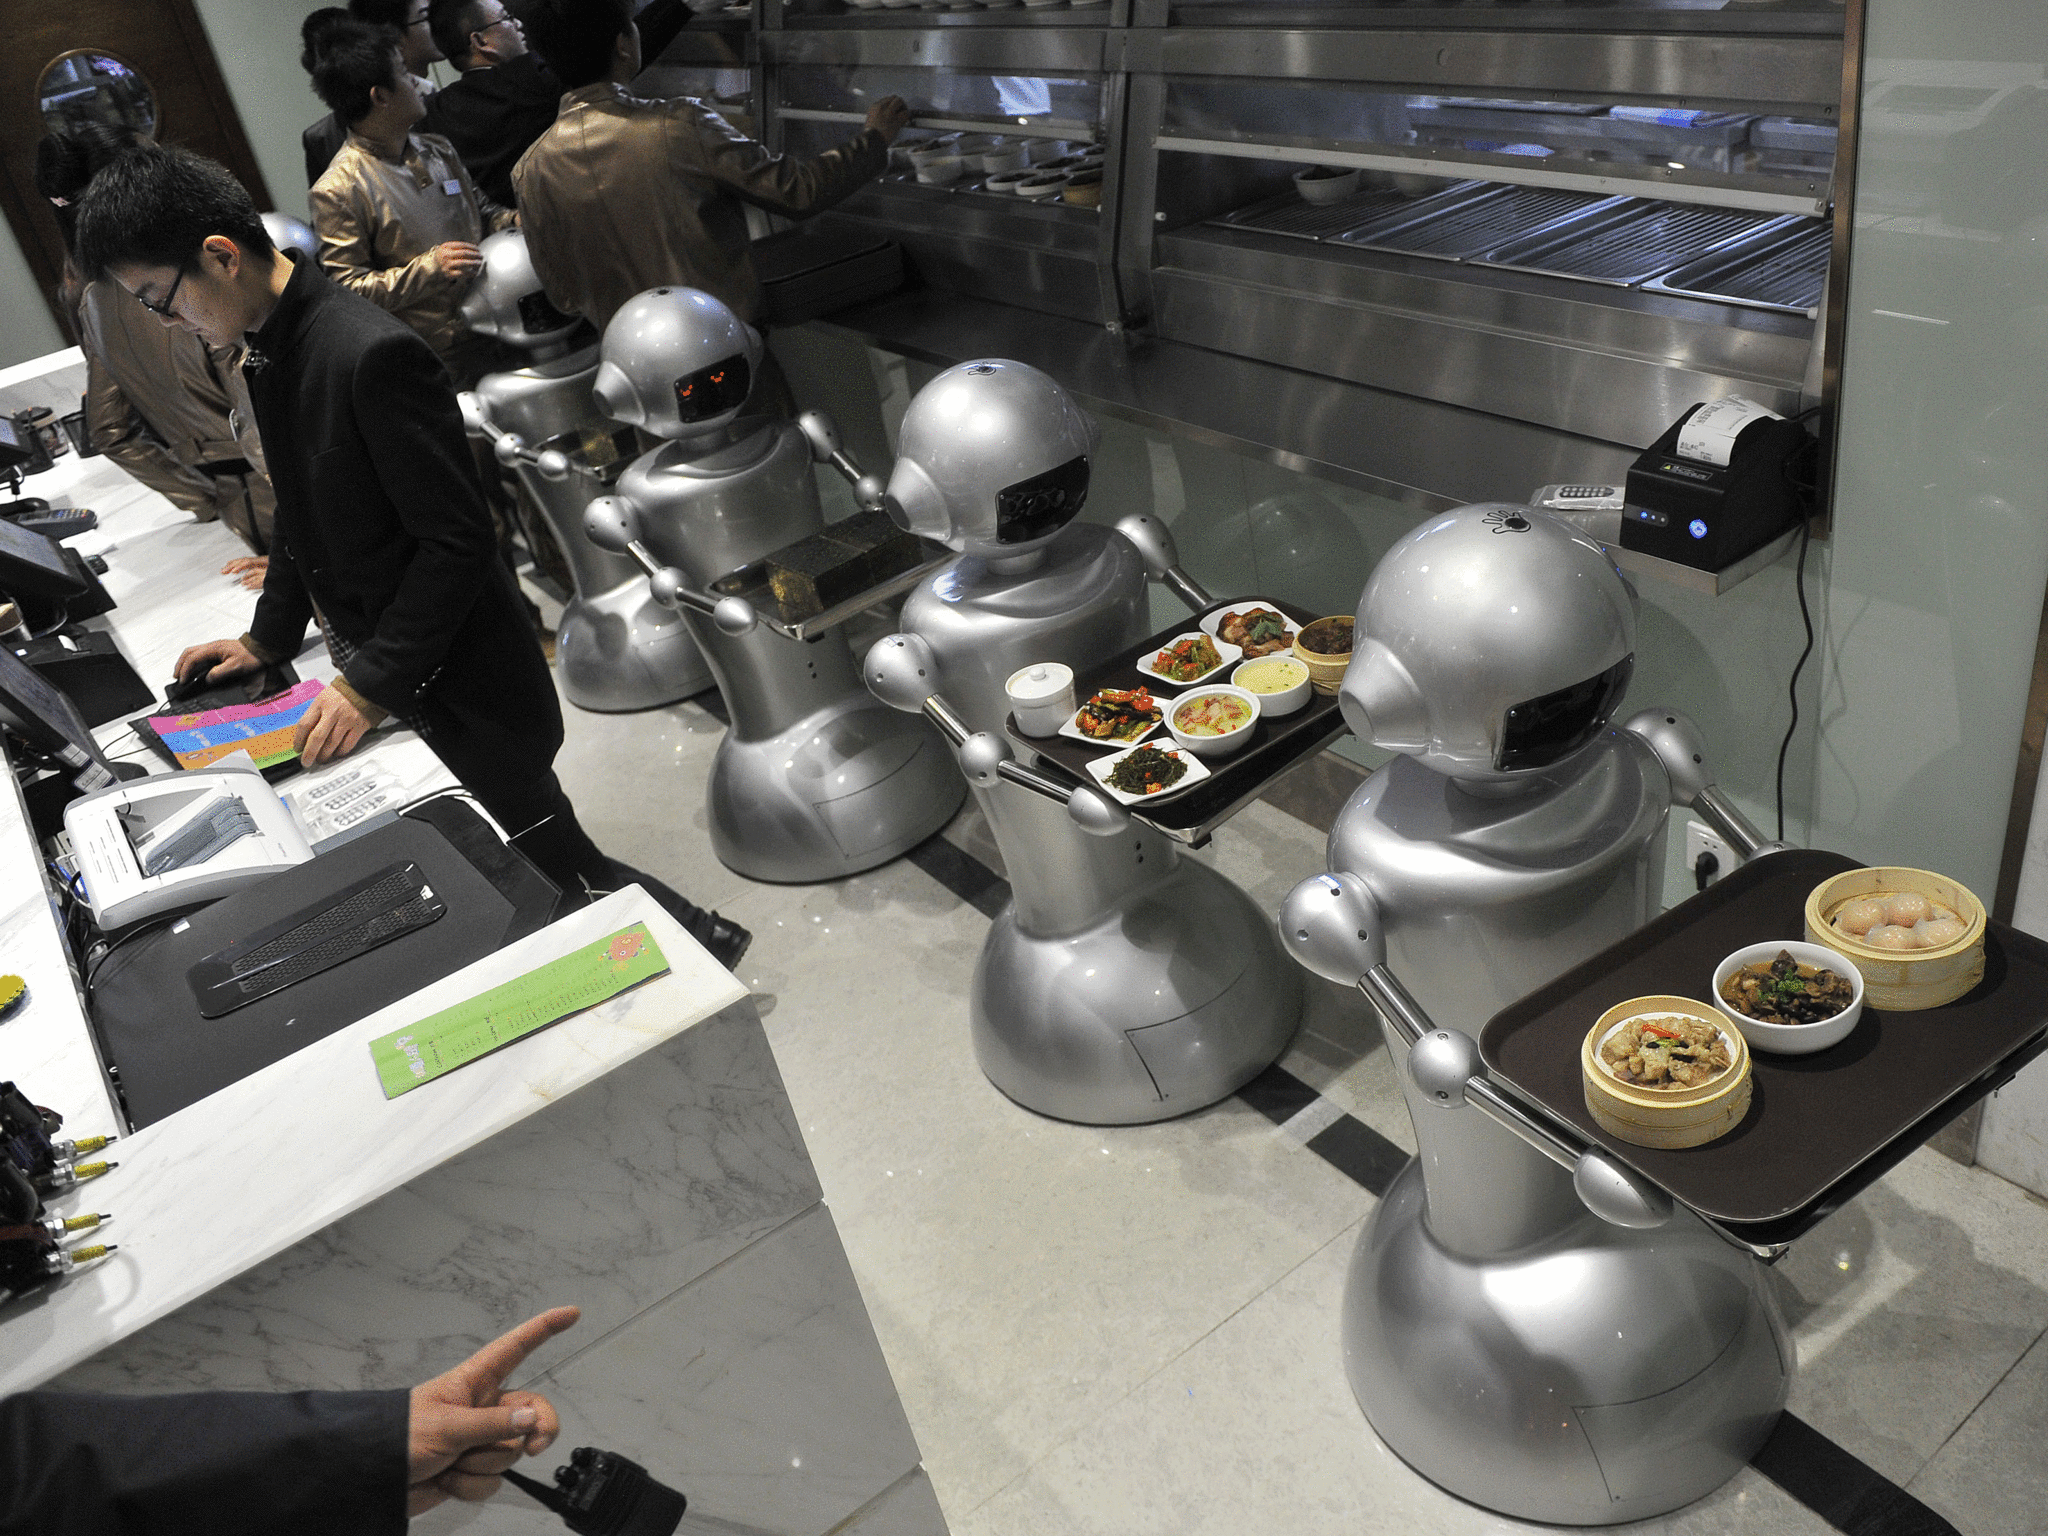 If you work in sales or customers services then there's a 70 per cent chance robots will take your job